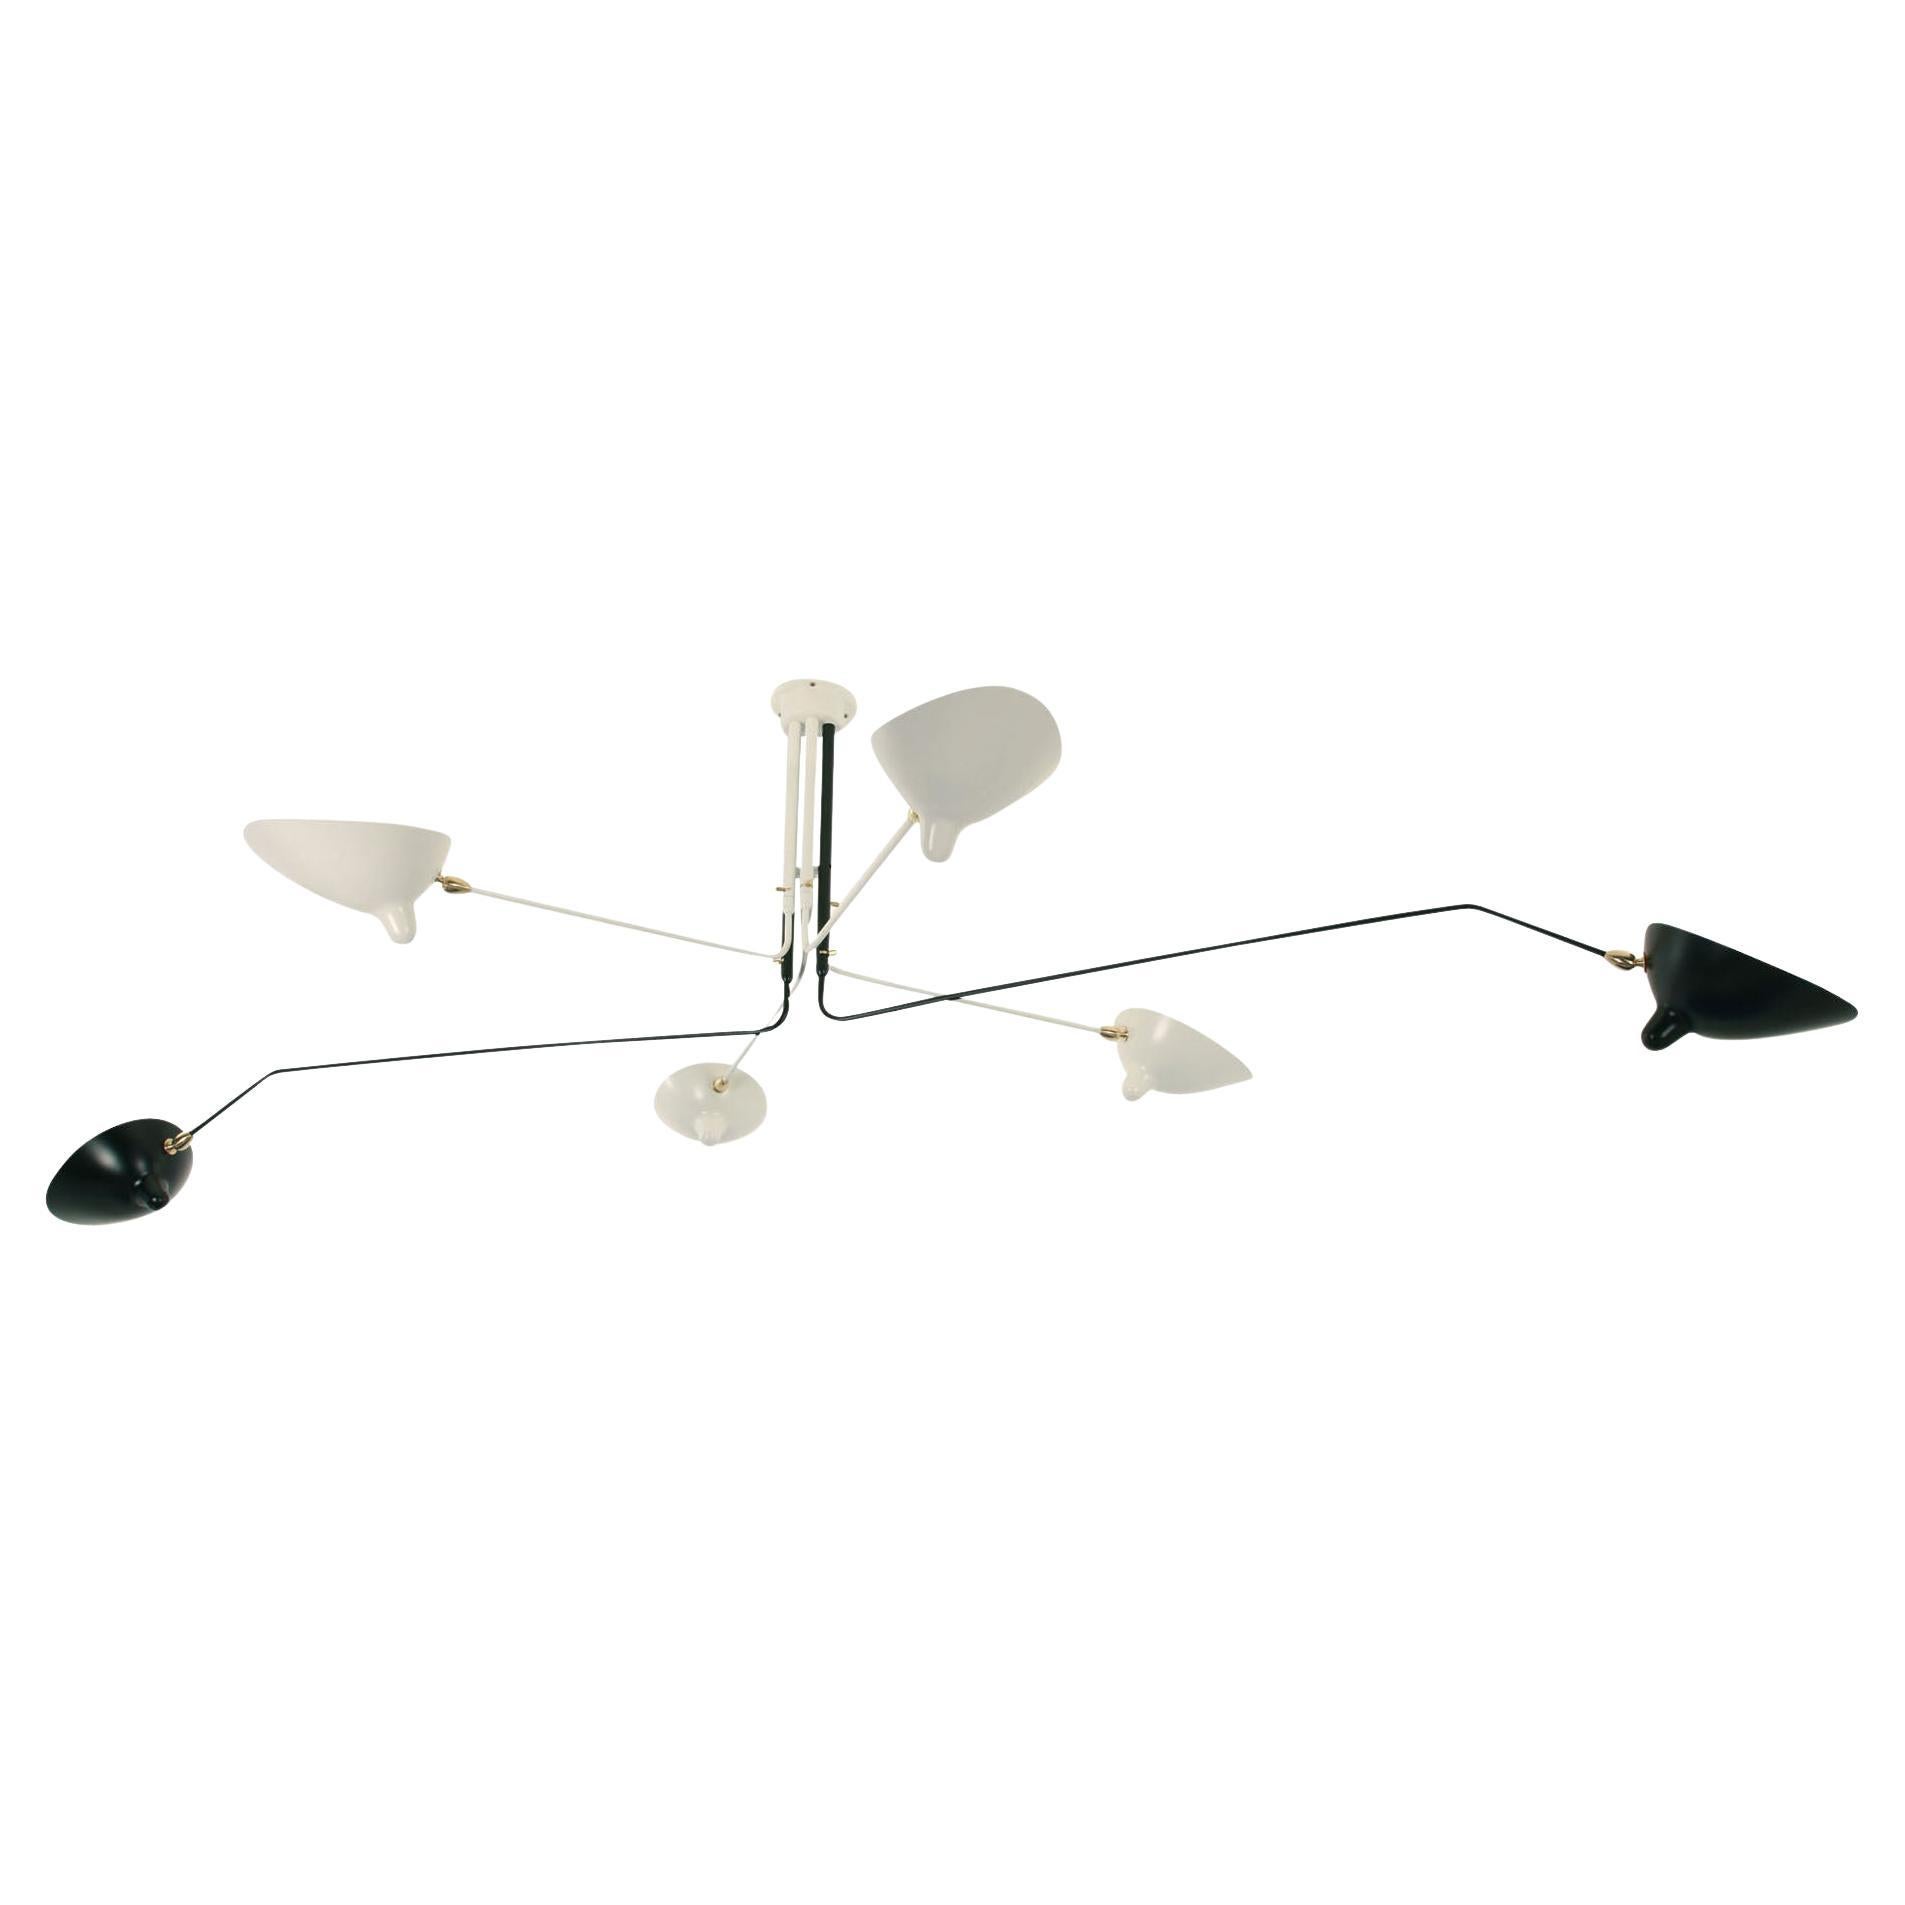 Serge Mouille - Ceiling Lamp with 6 Rotating Arms in Black and White - IN STOCK! For Sale